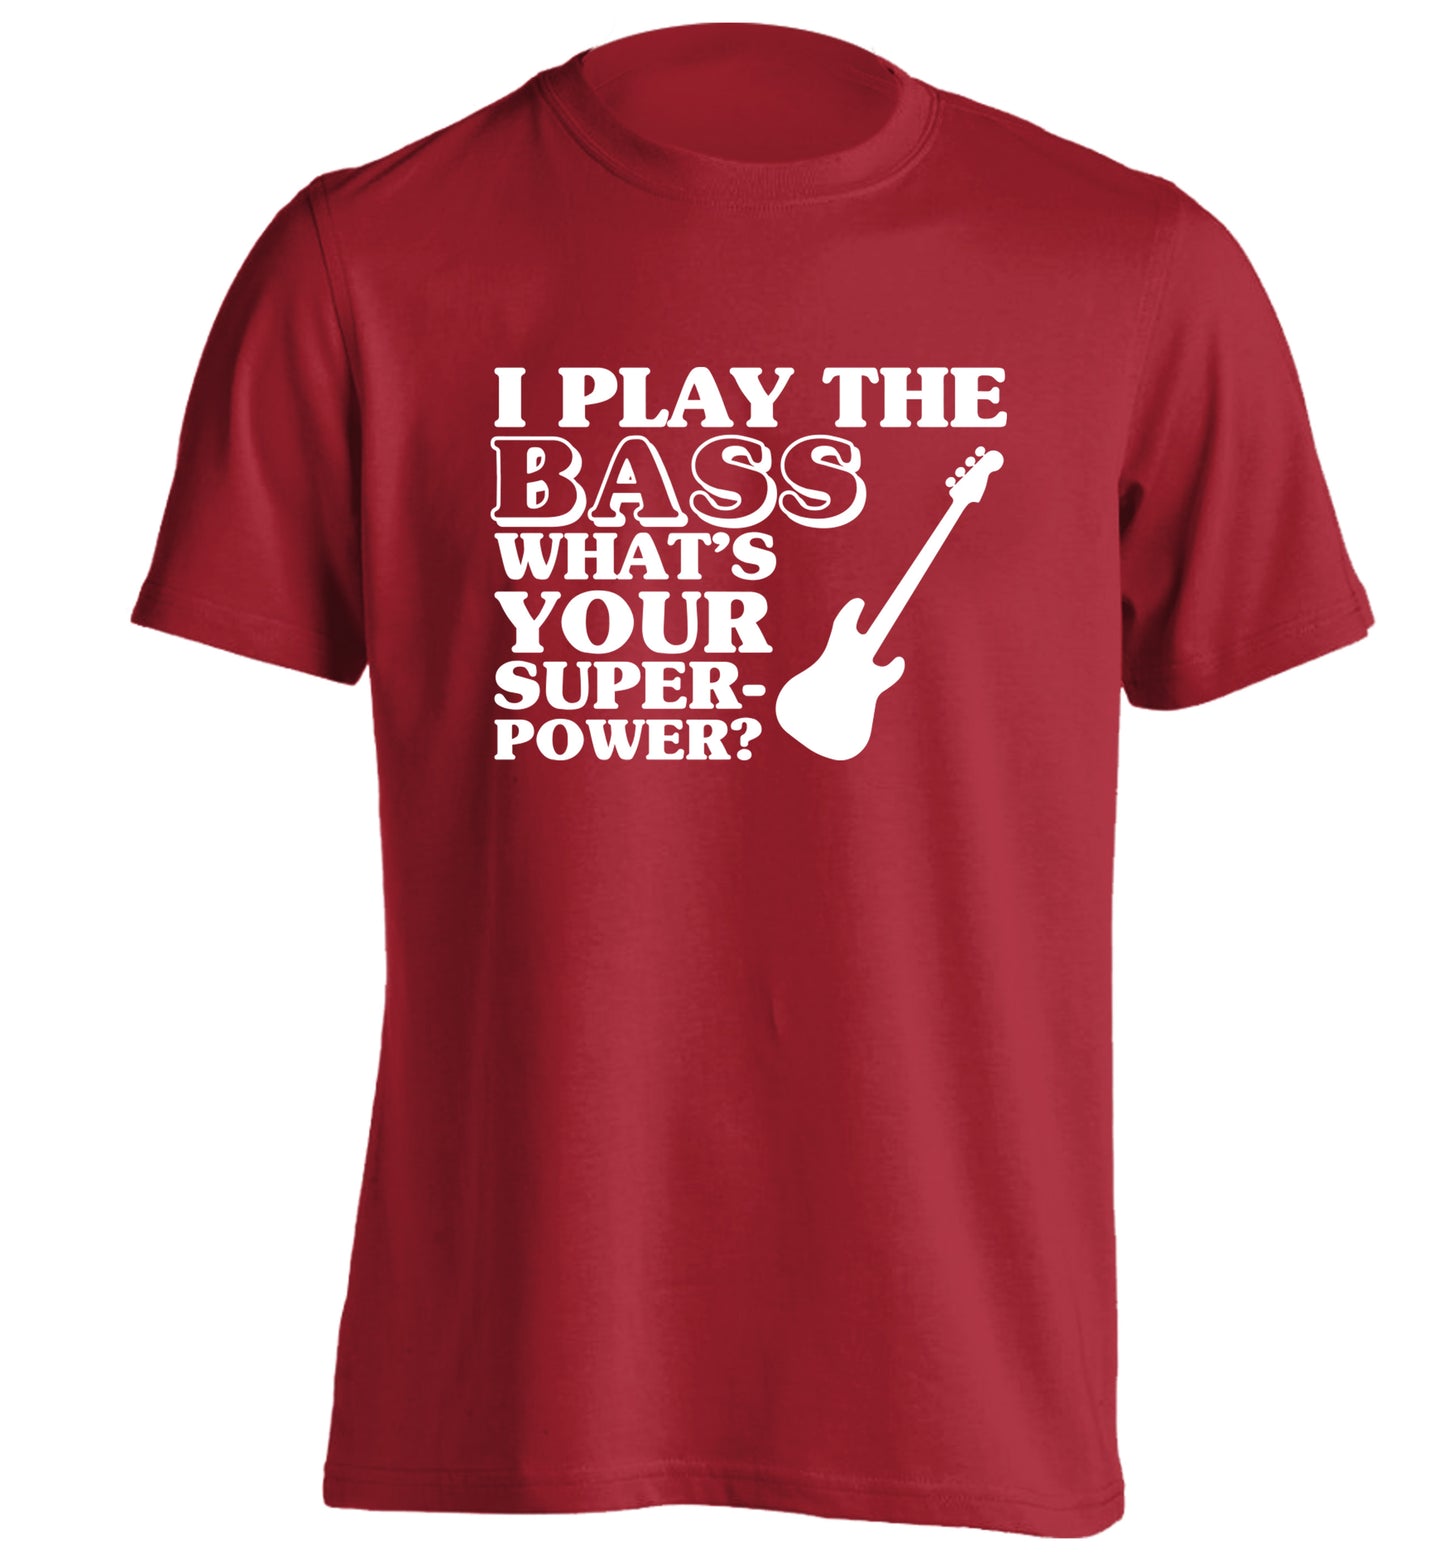 I play the bass what's your superpower? adults unisex red Tshirt 2XL